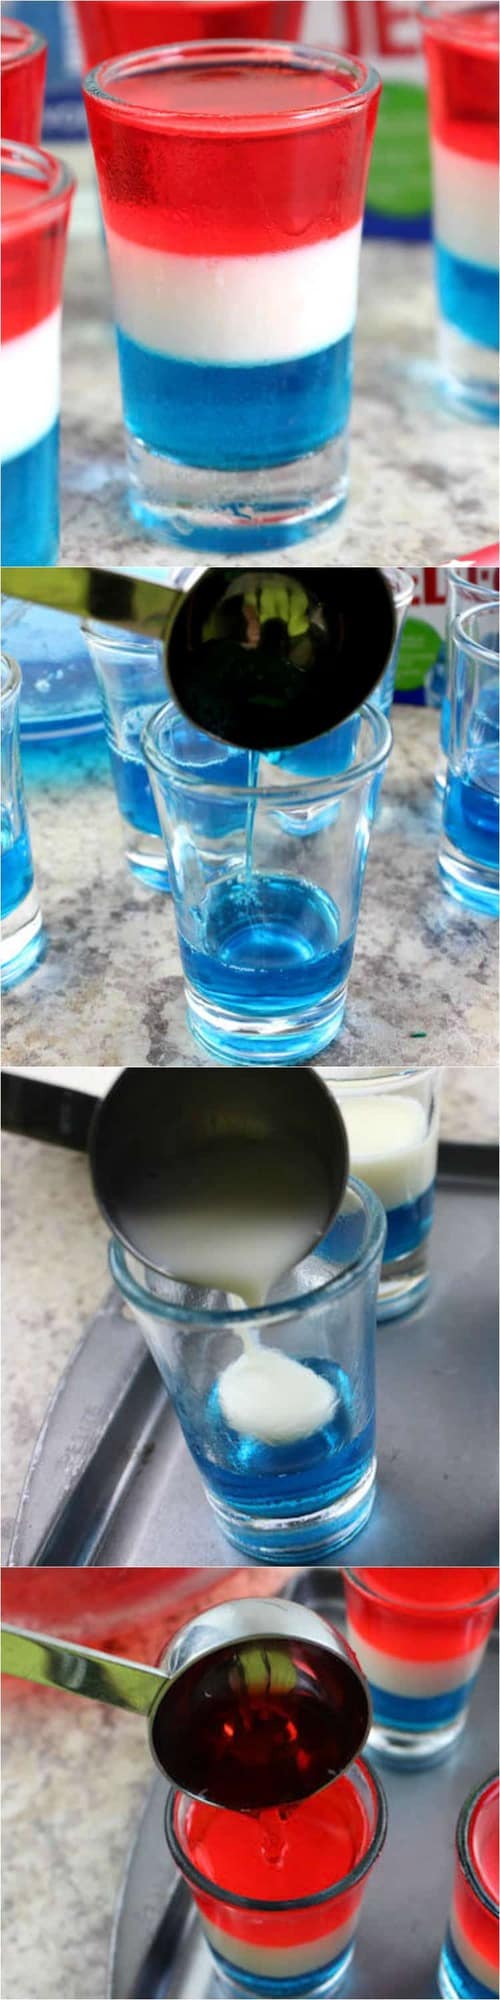 How to make Red White and Blue Layered Jello Shots